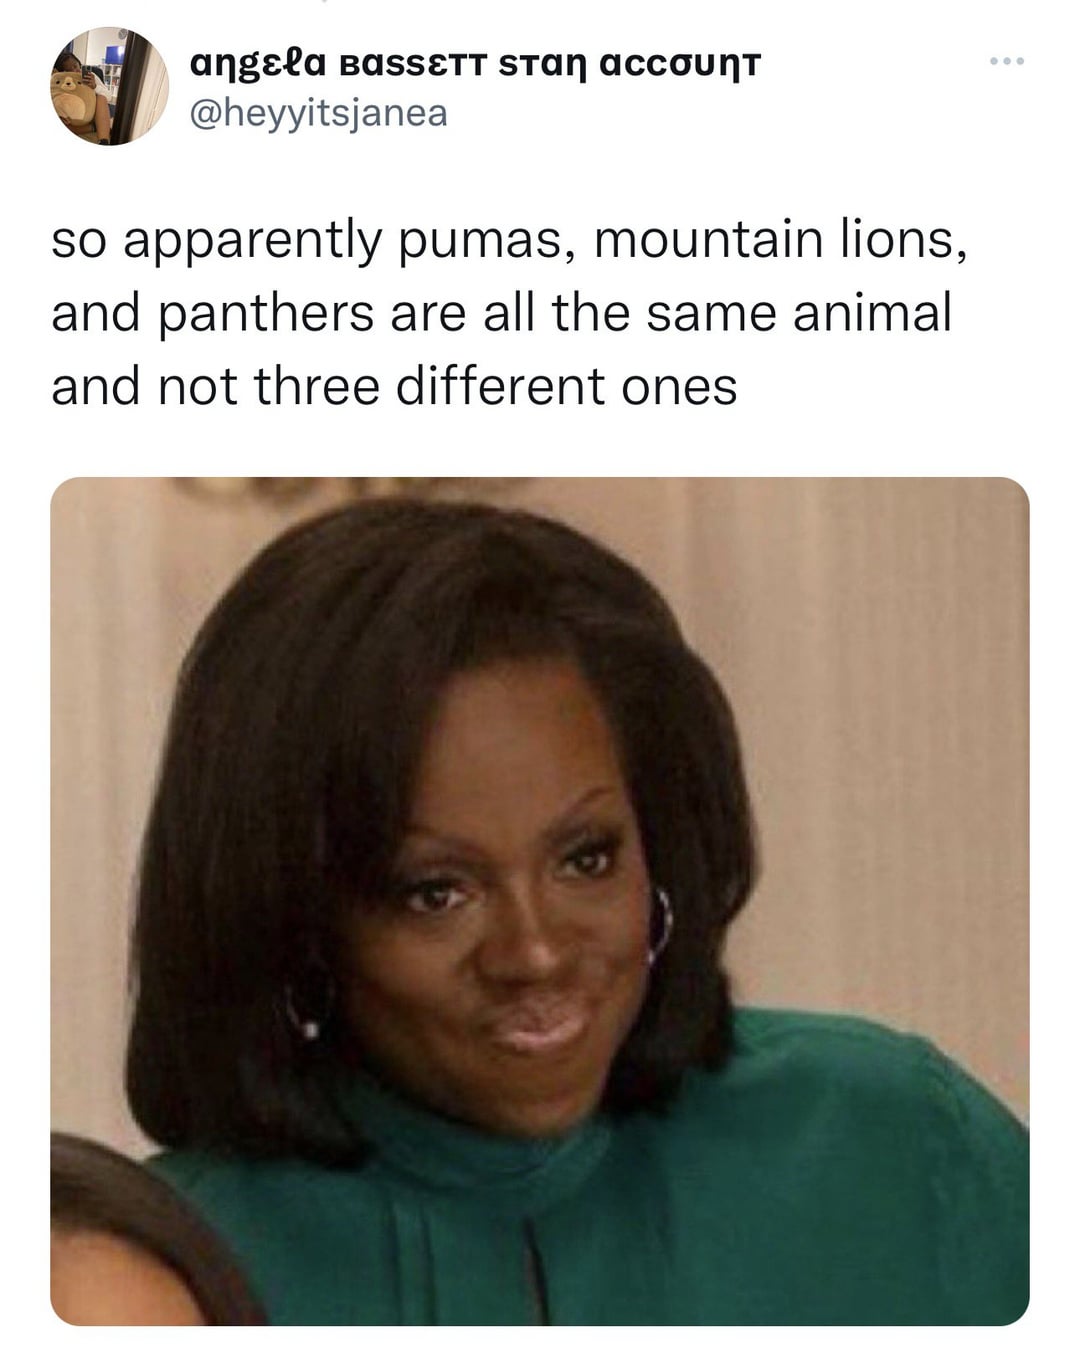 funny memes pics and tweets - head - angela BassETT stan acc so apparently pumas, mountain lions, and panthers are all the same animal and not three different ones